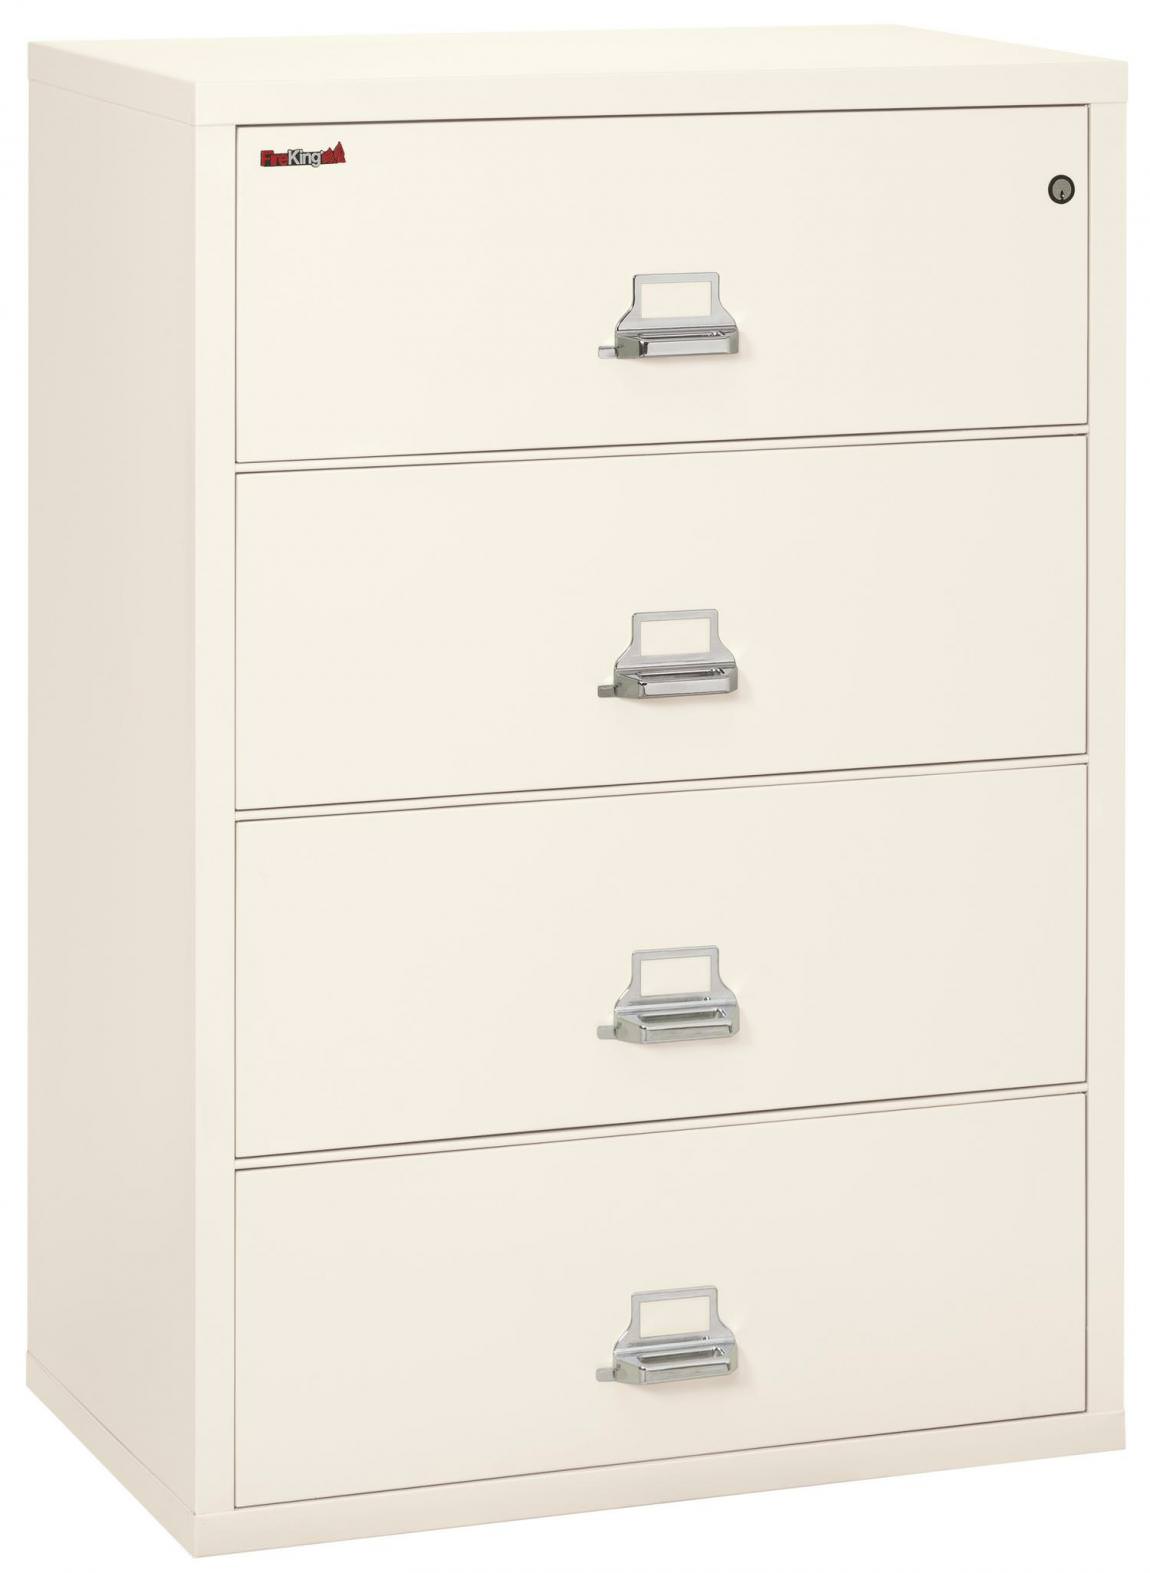 4 Drawer Fireproof Lateral File Cabinet - 38 Inch